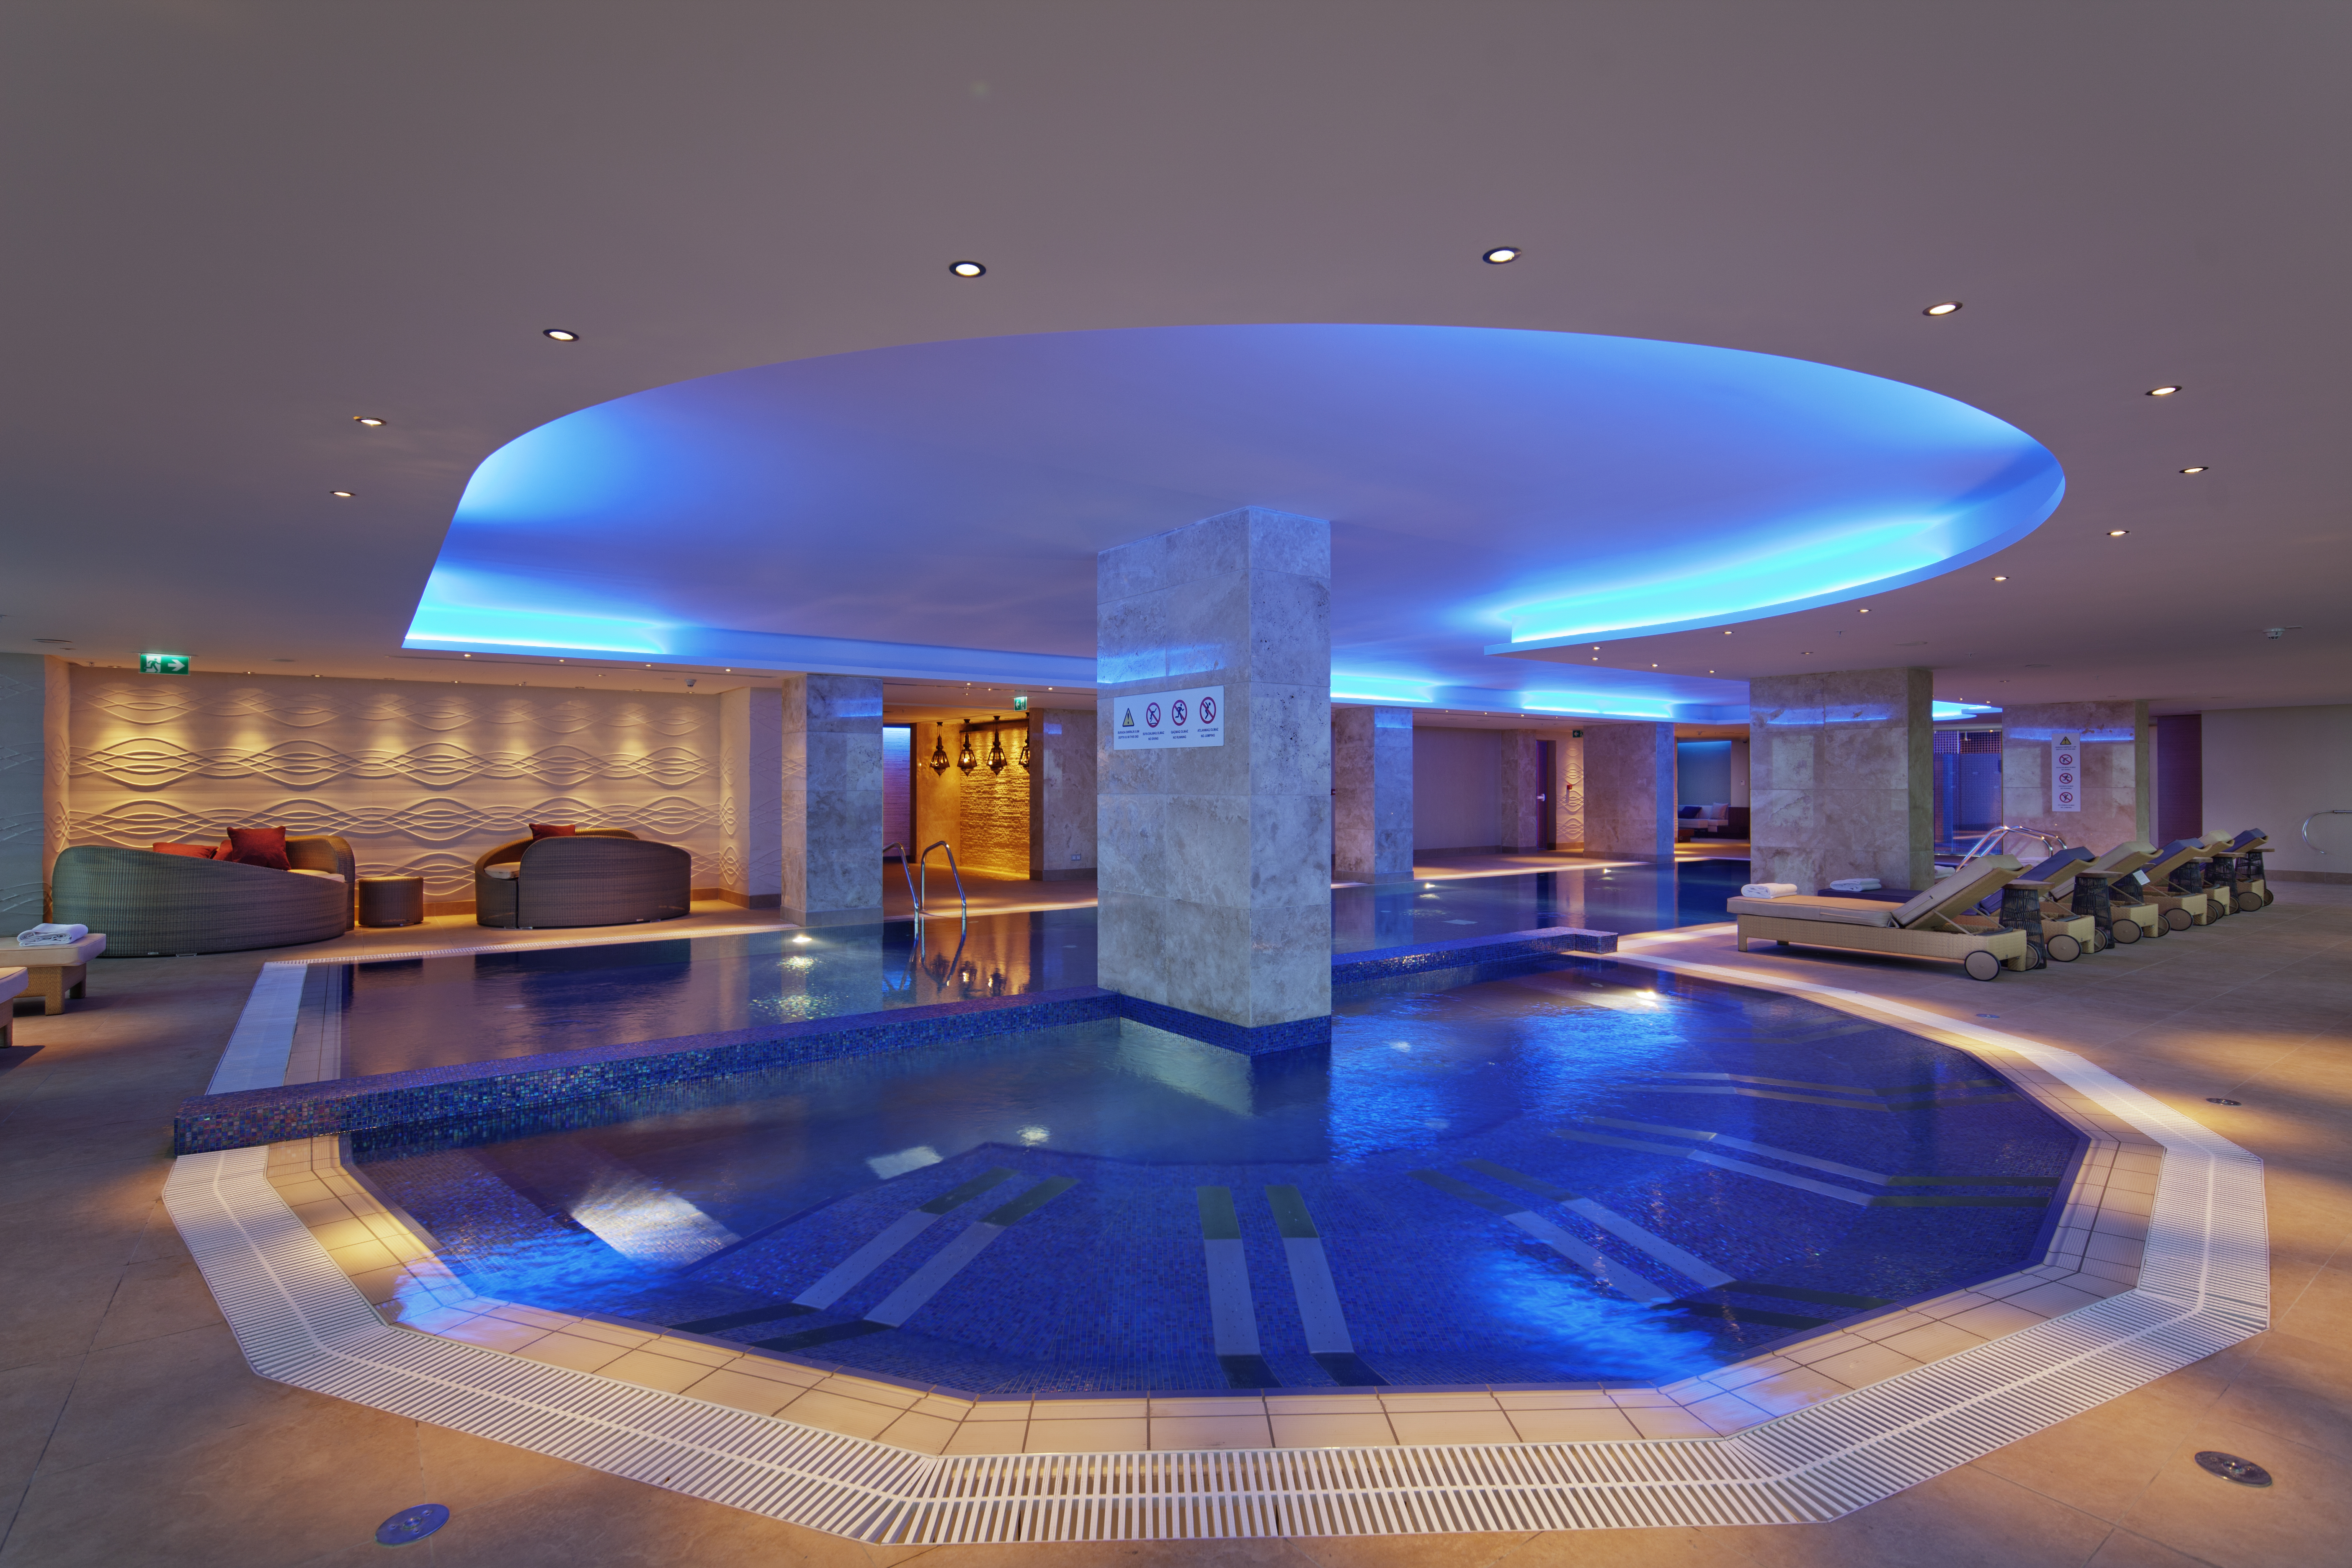 eforea Spa relaxation pool